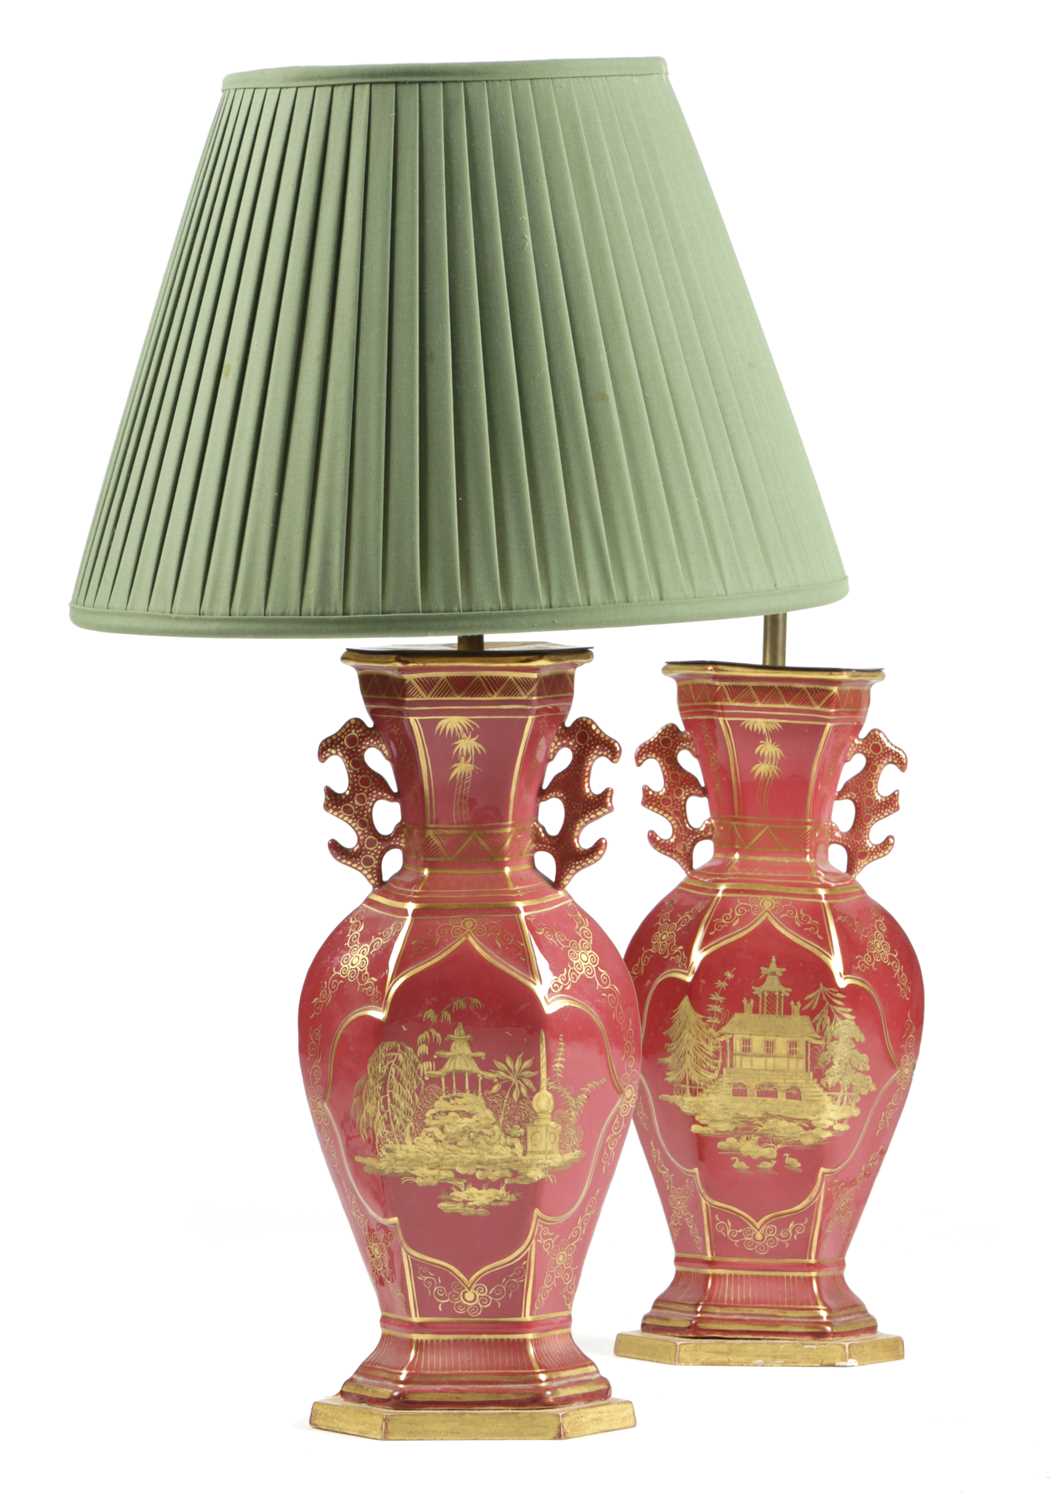 A PAIR OF POTTERY CHINOISERIE TABLE LAMPS IN MASON'S STYLE, 20TH CENTURY each decorated in gilt on a